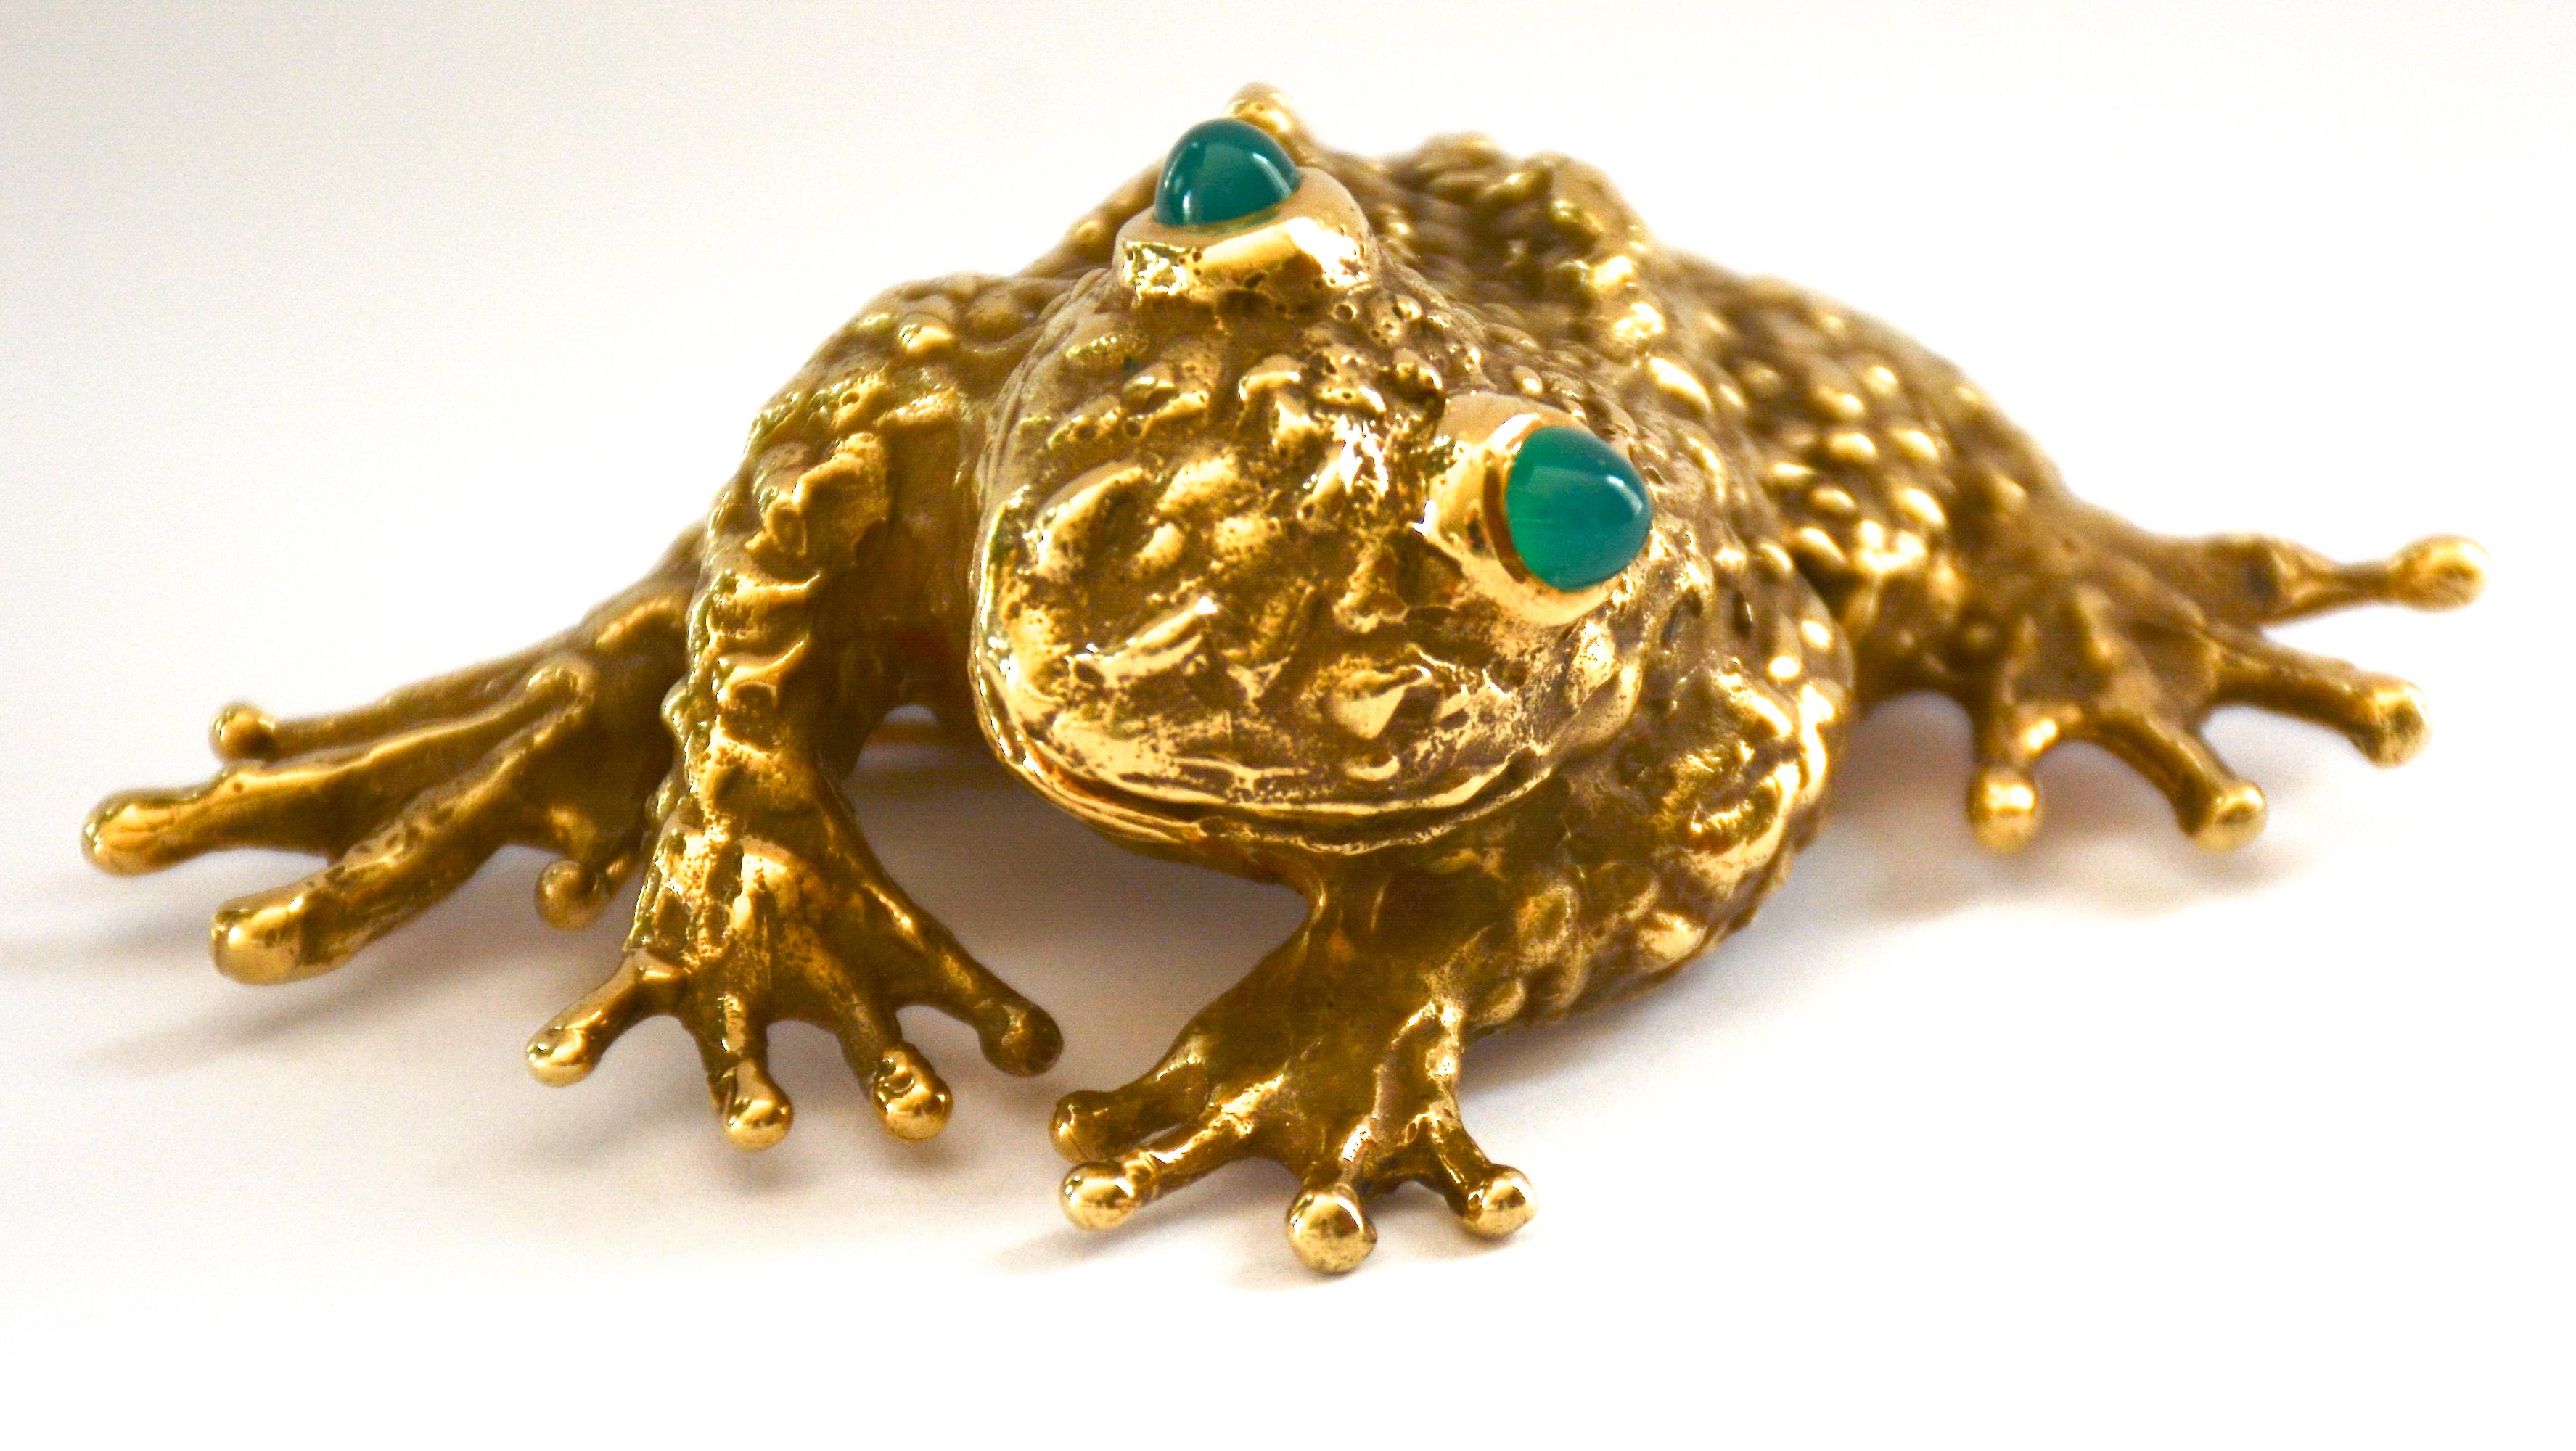 Contemporary Erwin Pearl 1980s Fine Jewelry 18k. Gold Frog Brooch Set with Chrysoprase Eyes